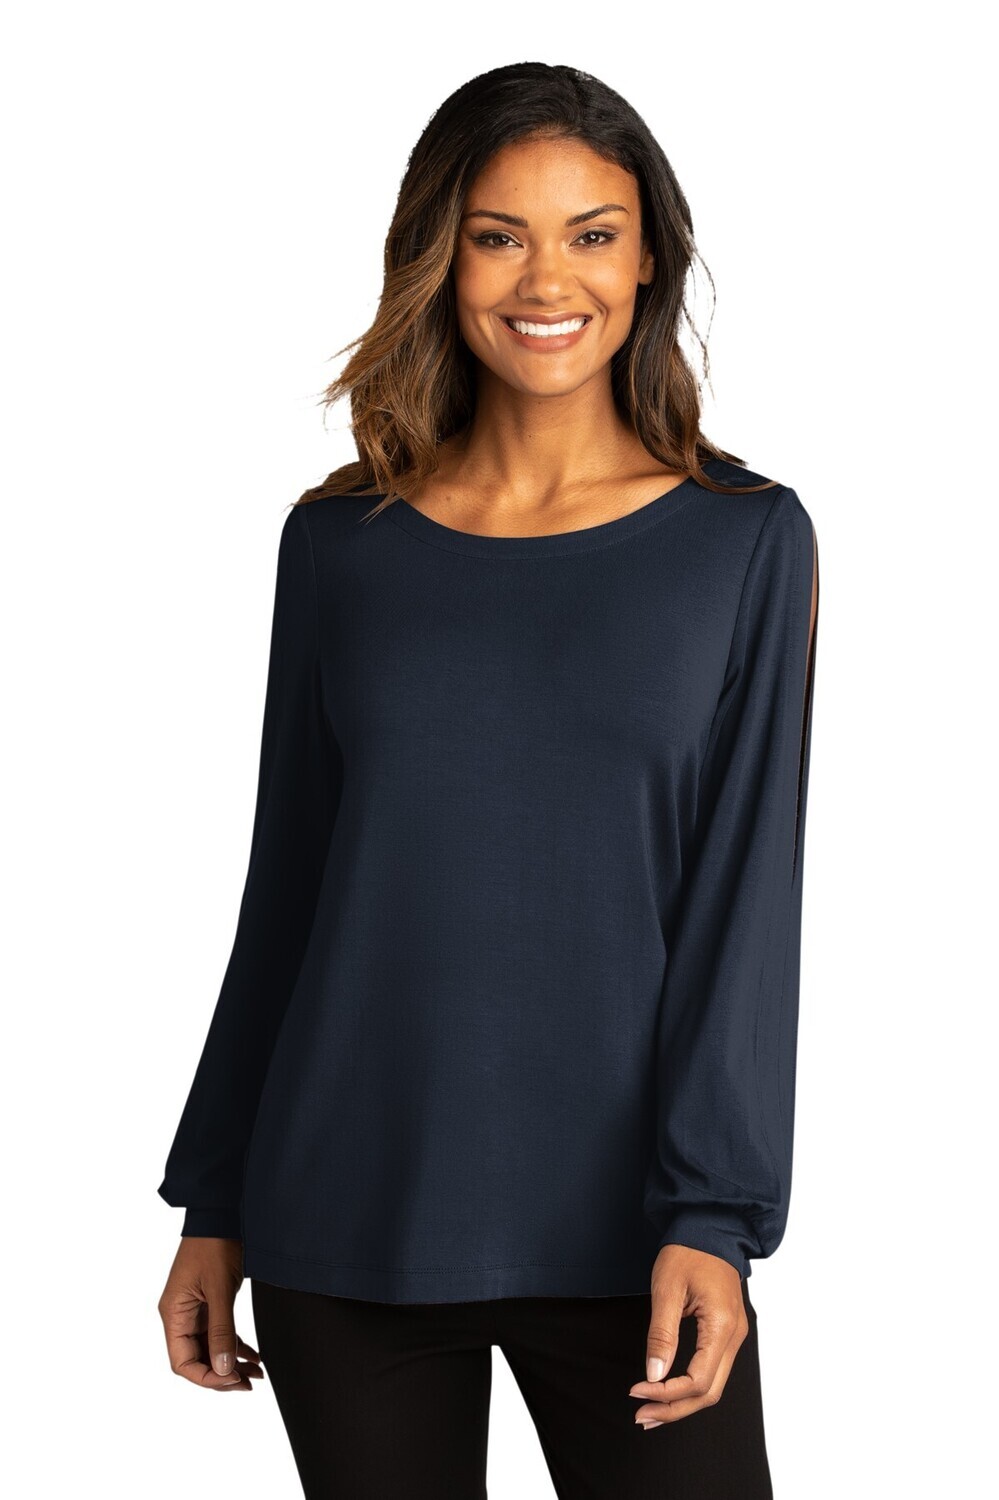 PORT AUTHORITY LADIES LUXE KNIT TOP (LK5600) RIVER NAVY BLUE - XS